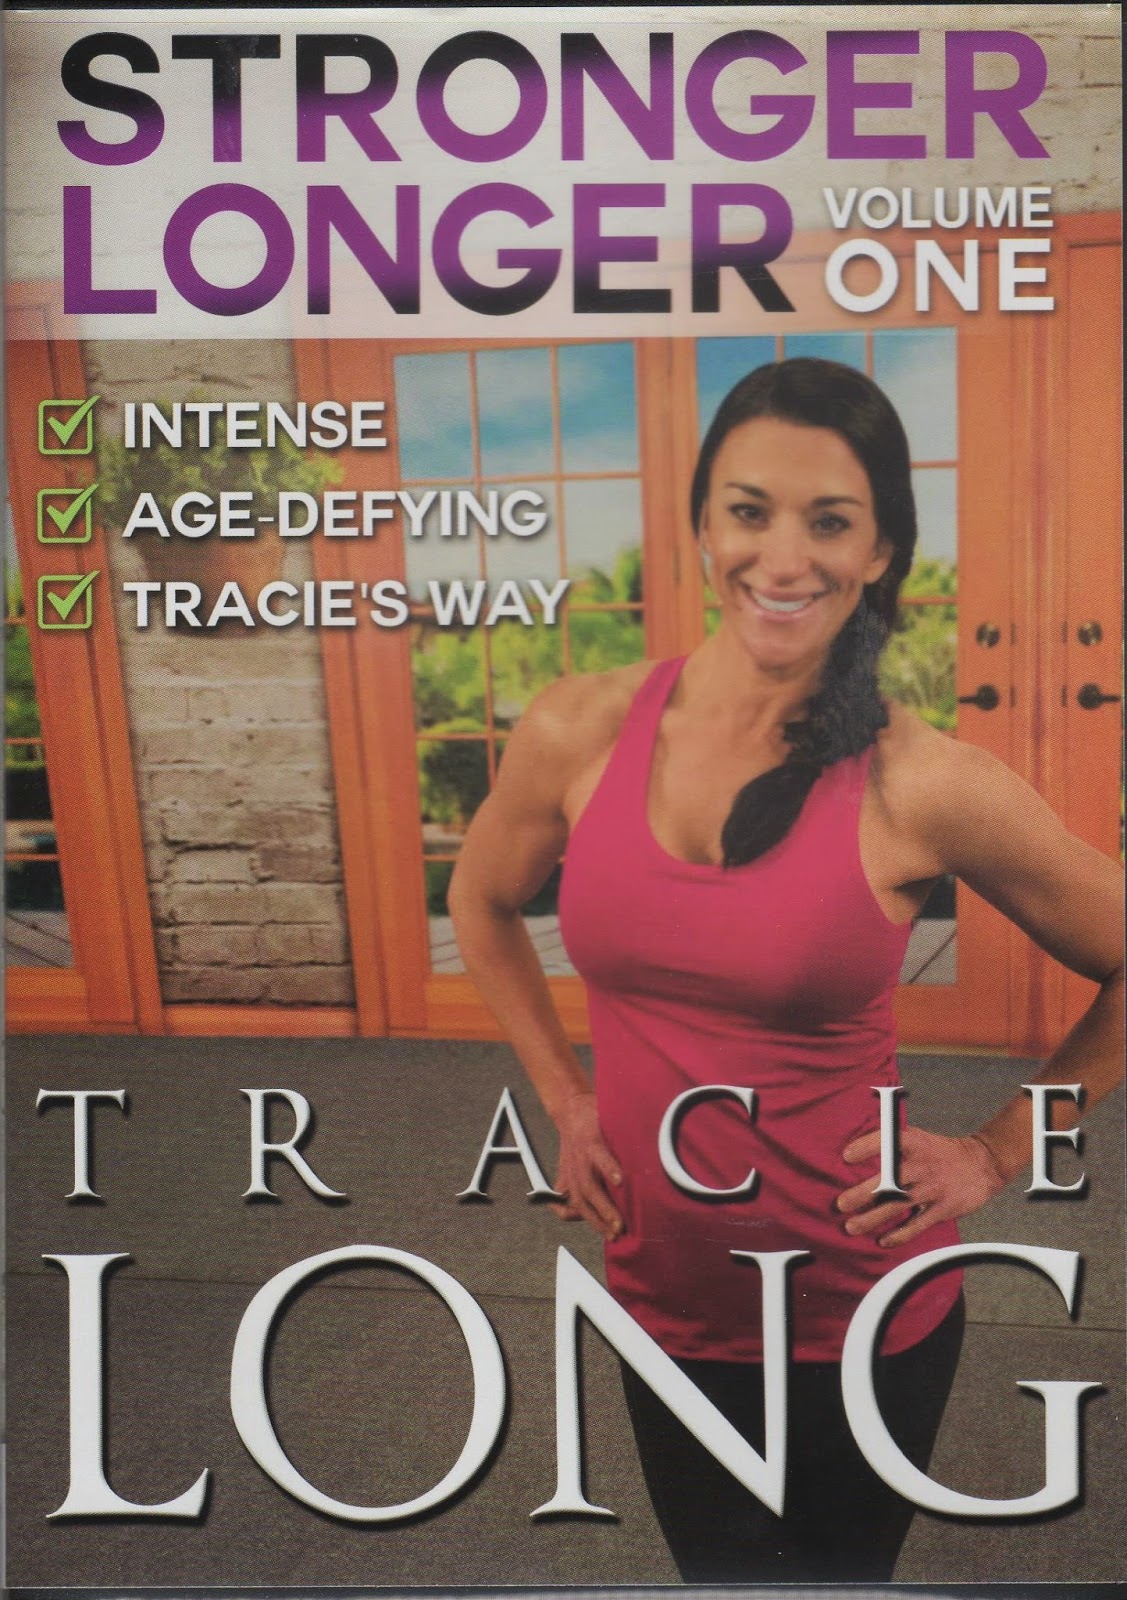 10 Minute Tracie long workouts for Build Muscle